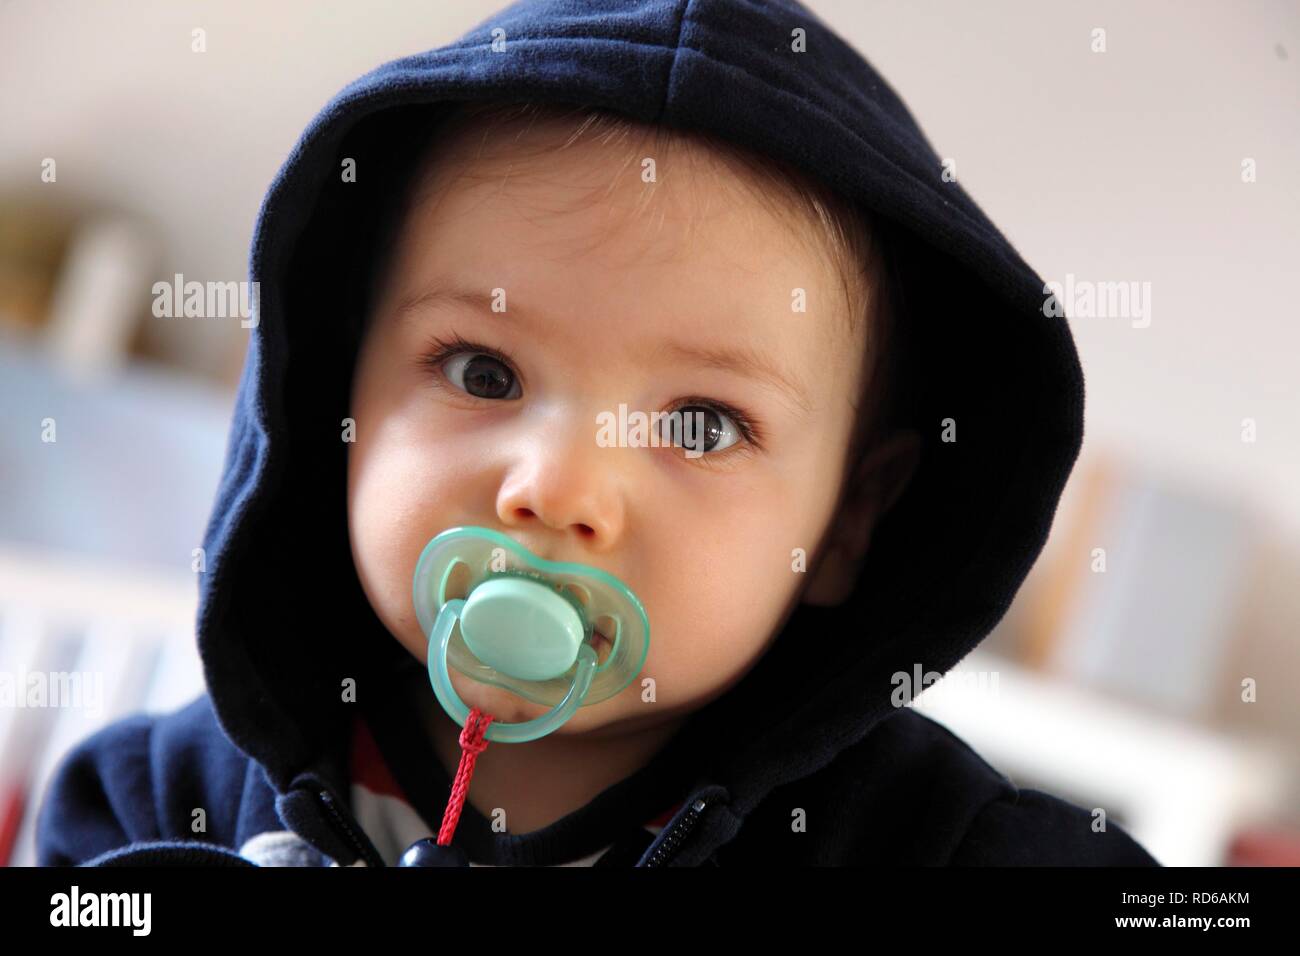 Portrait of a little boy, 10 months, with pacifier and hoodie Stock Photo